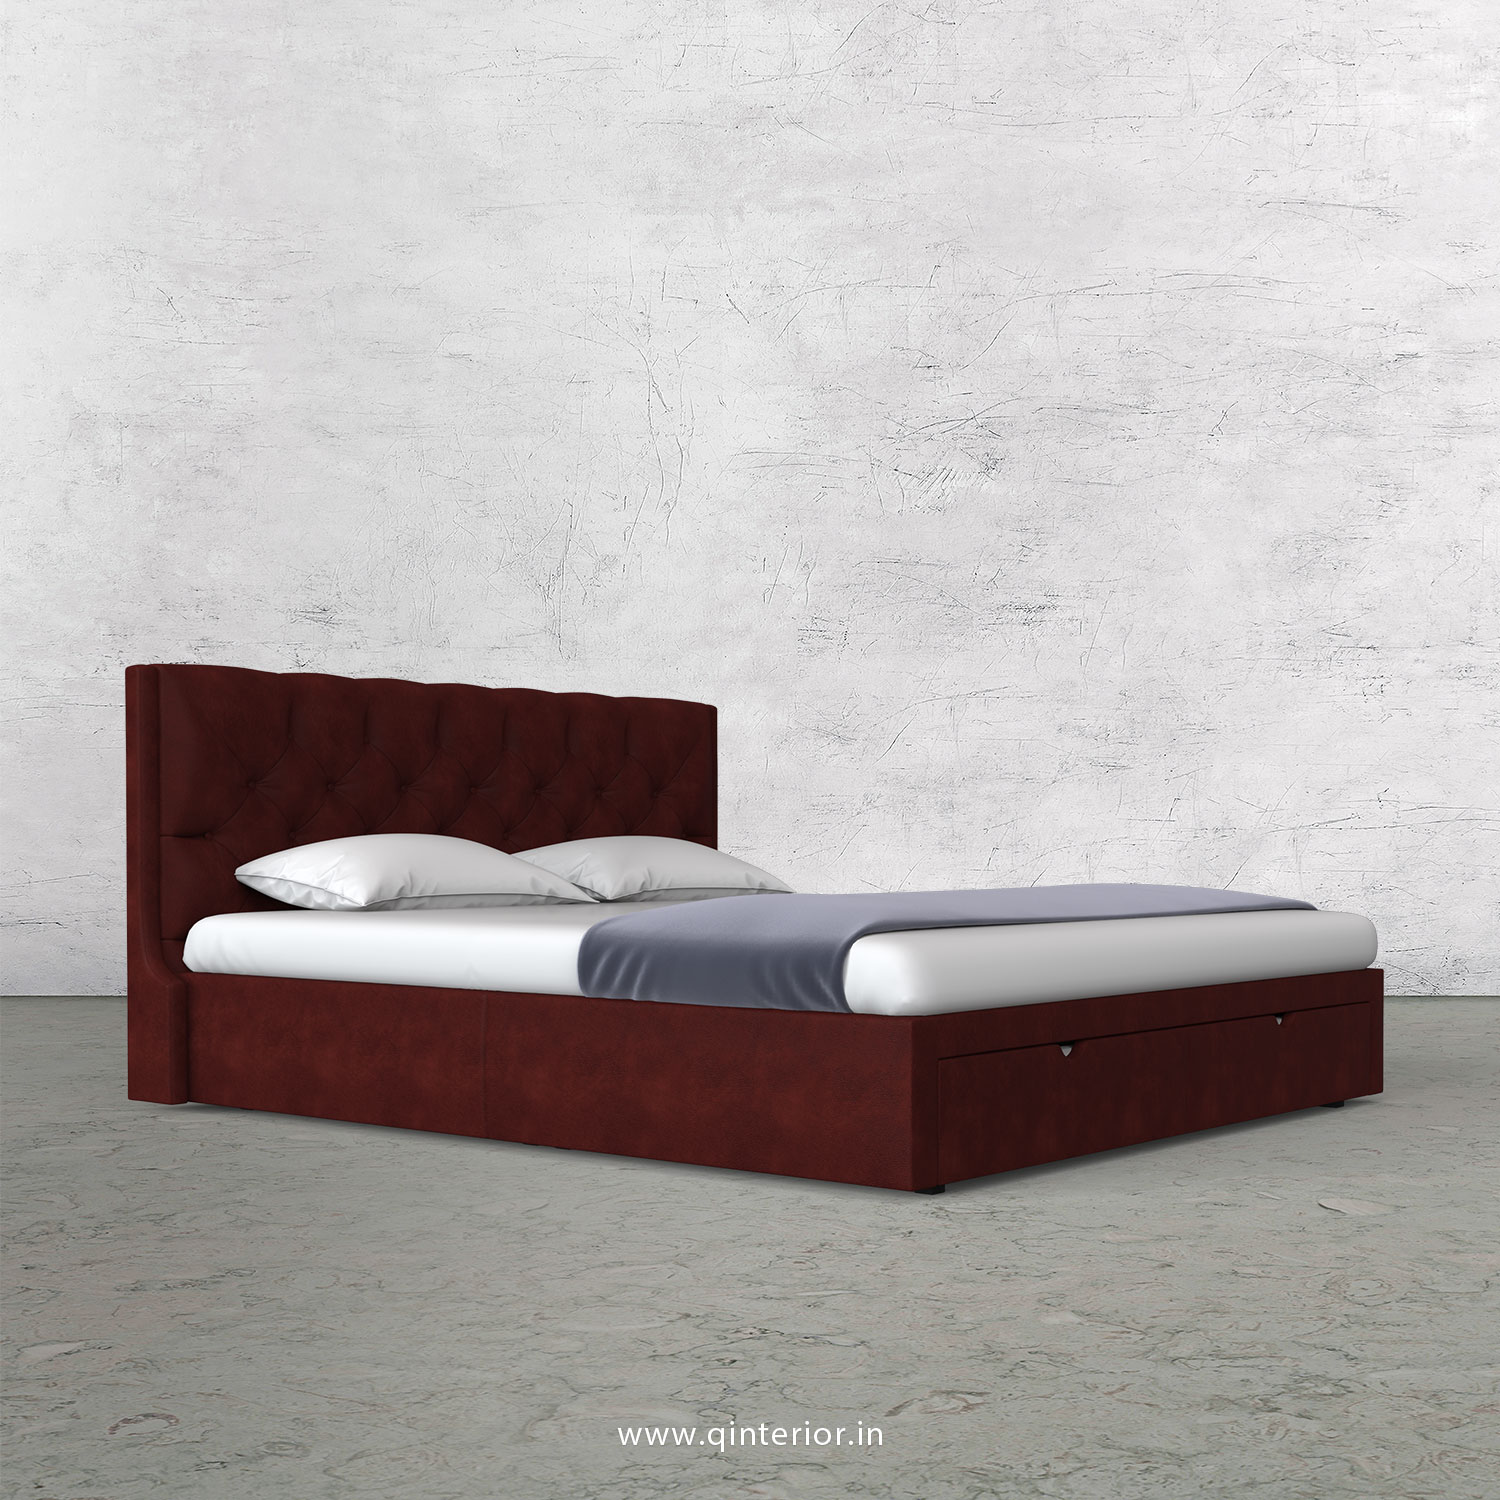 Scorpius King Size Storage Bed in Fab Leather Fabric - KBD001 FL17